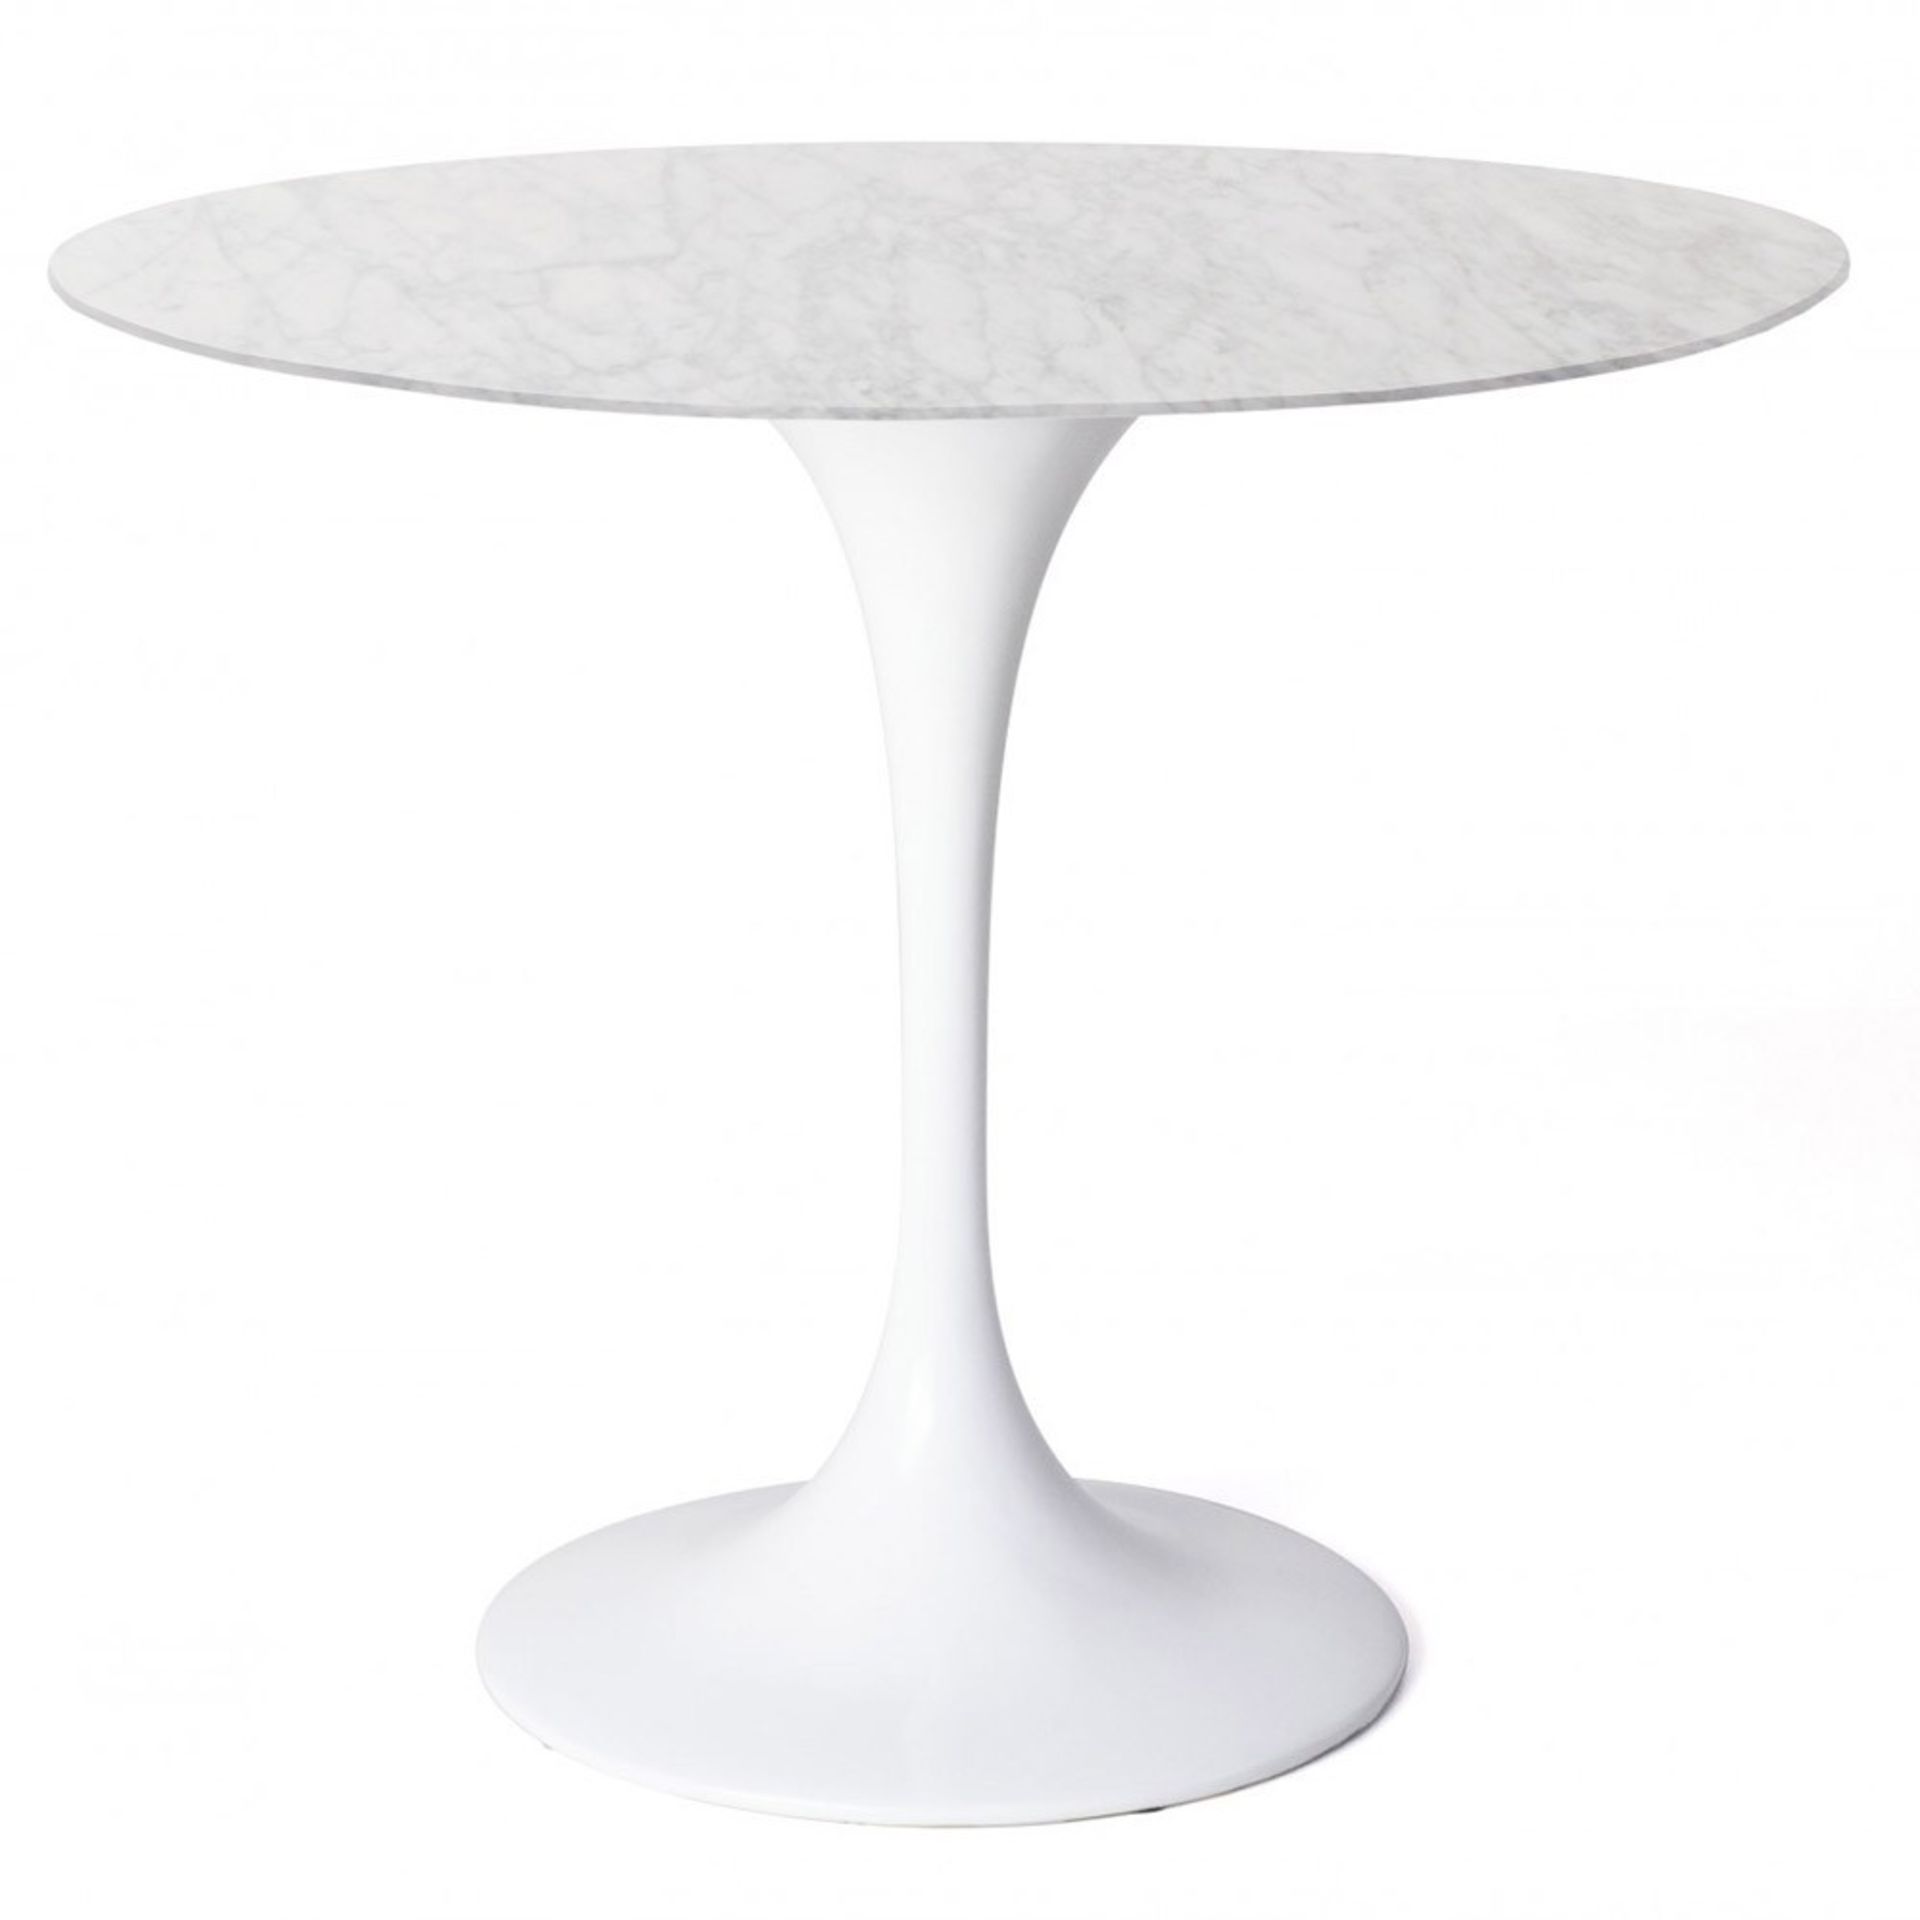 Boxed/As New - Round Stem Table in White with White Marble Top (2 Boxes Model TS-B012M). Size (H)